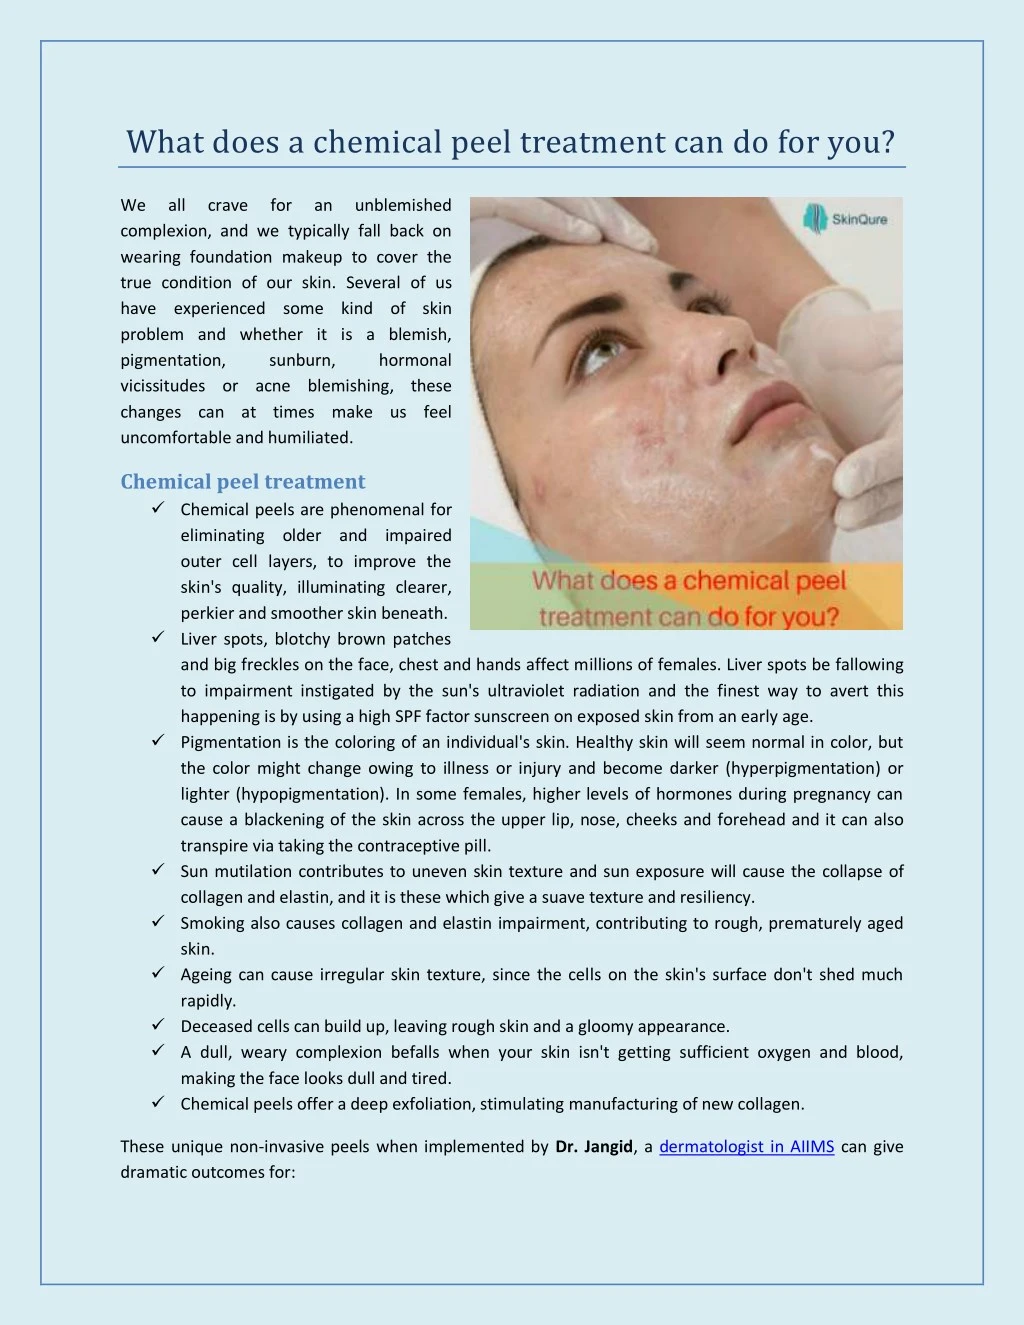 what does a chemical peel treatment can do for you